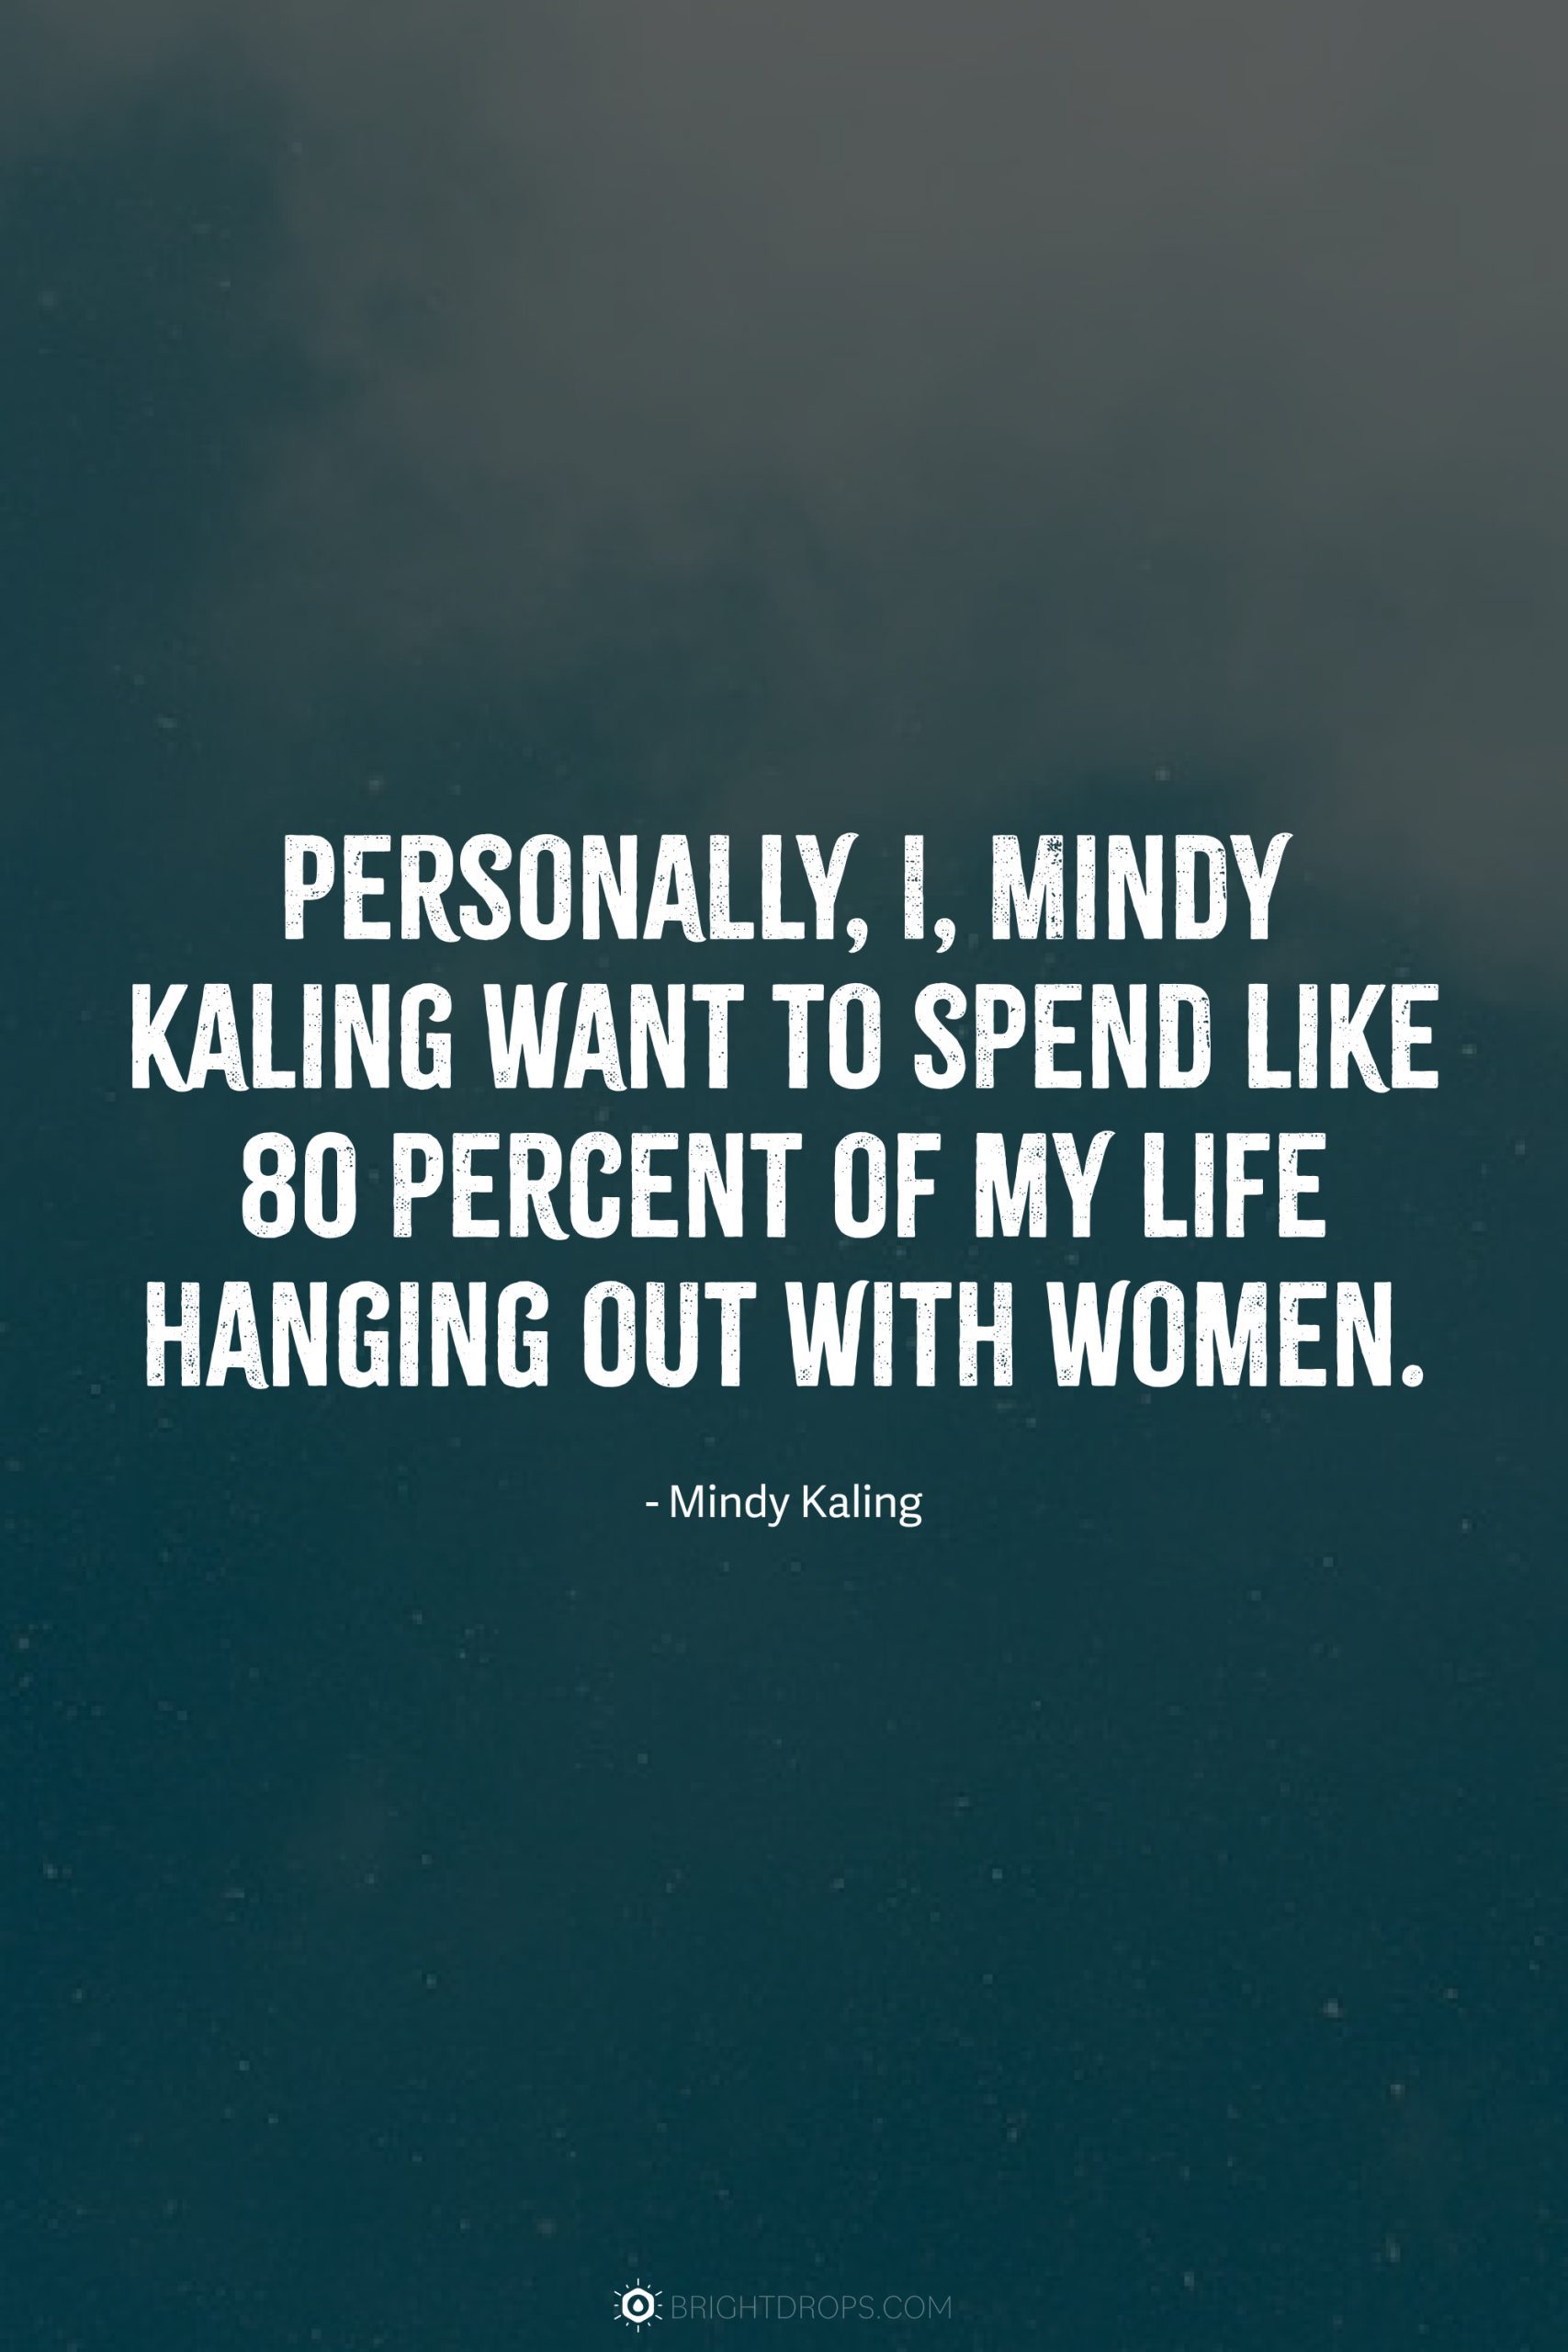 Personally, I, Mindy Kaling want to spend like 80 percent of my life hanging out with women.